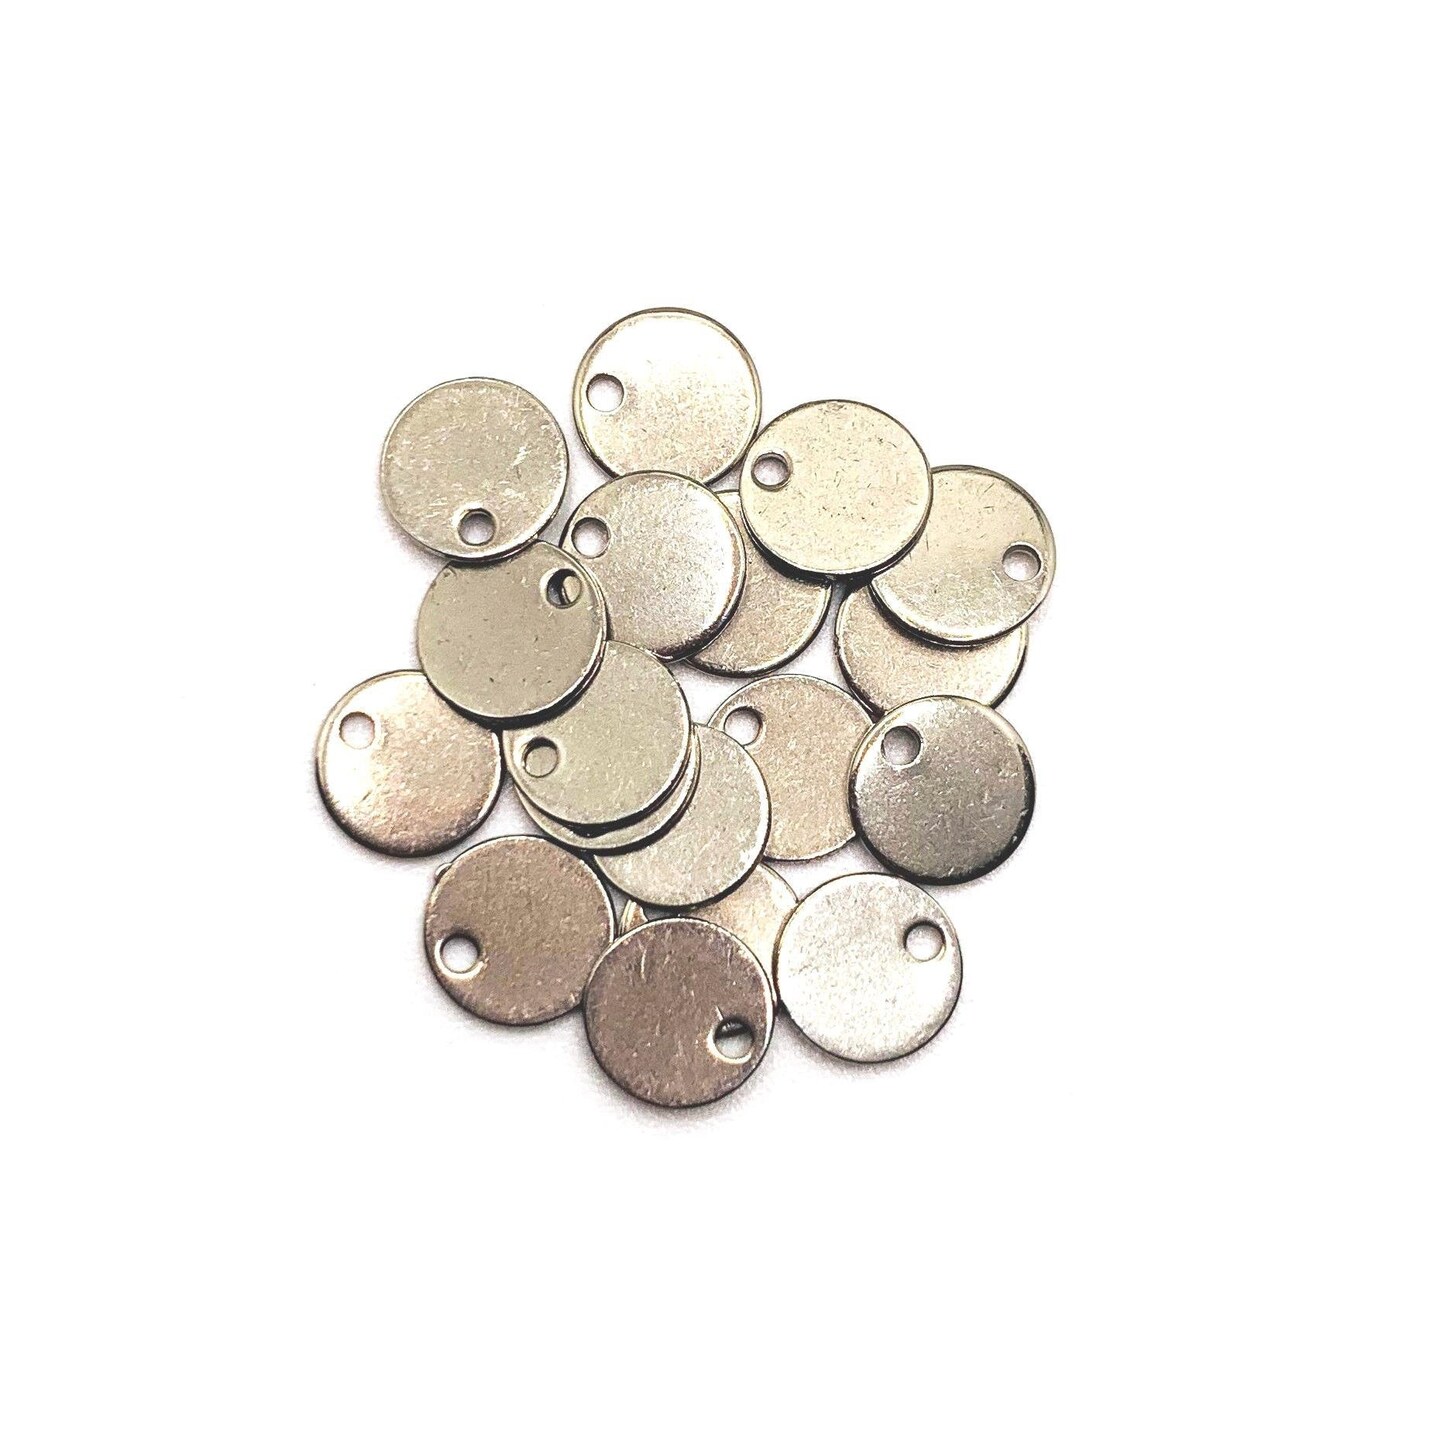 20, 50 or 100 Pieces: 8 mm Stainless Steel Silver Stamping Tag Blanks